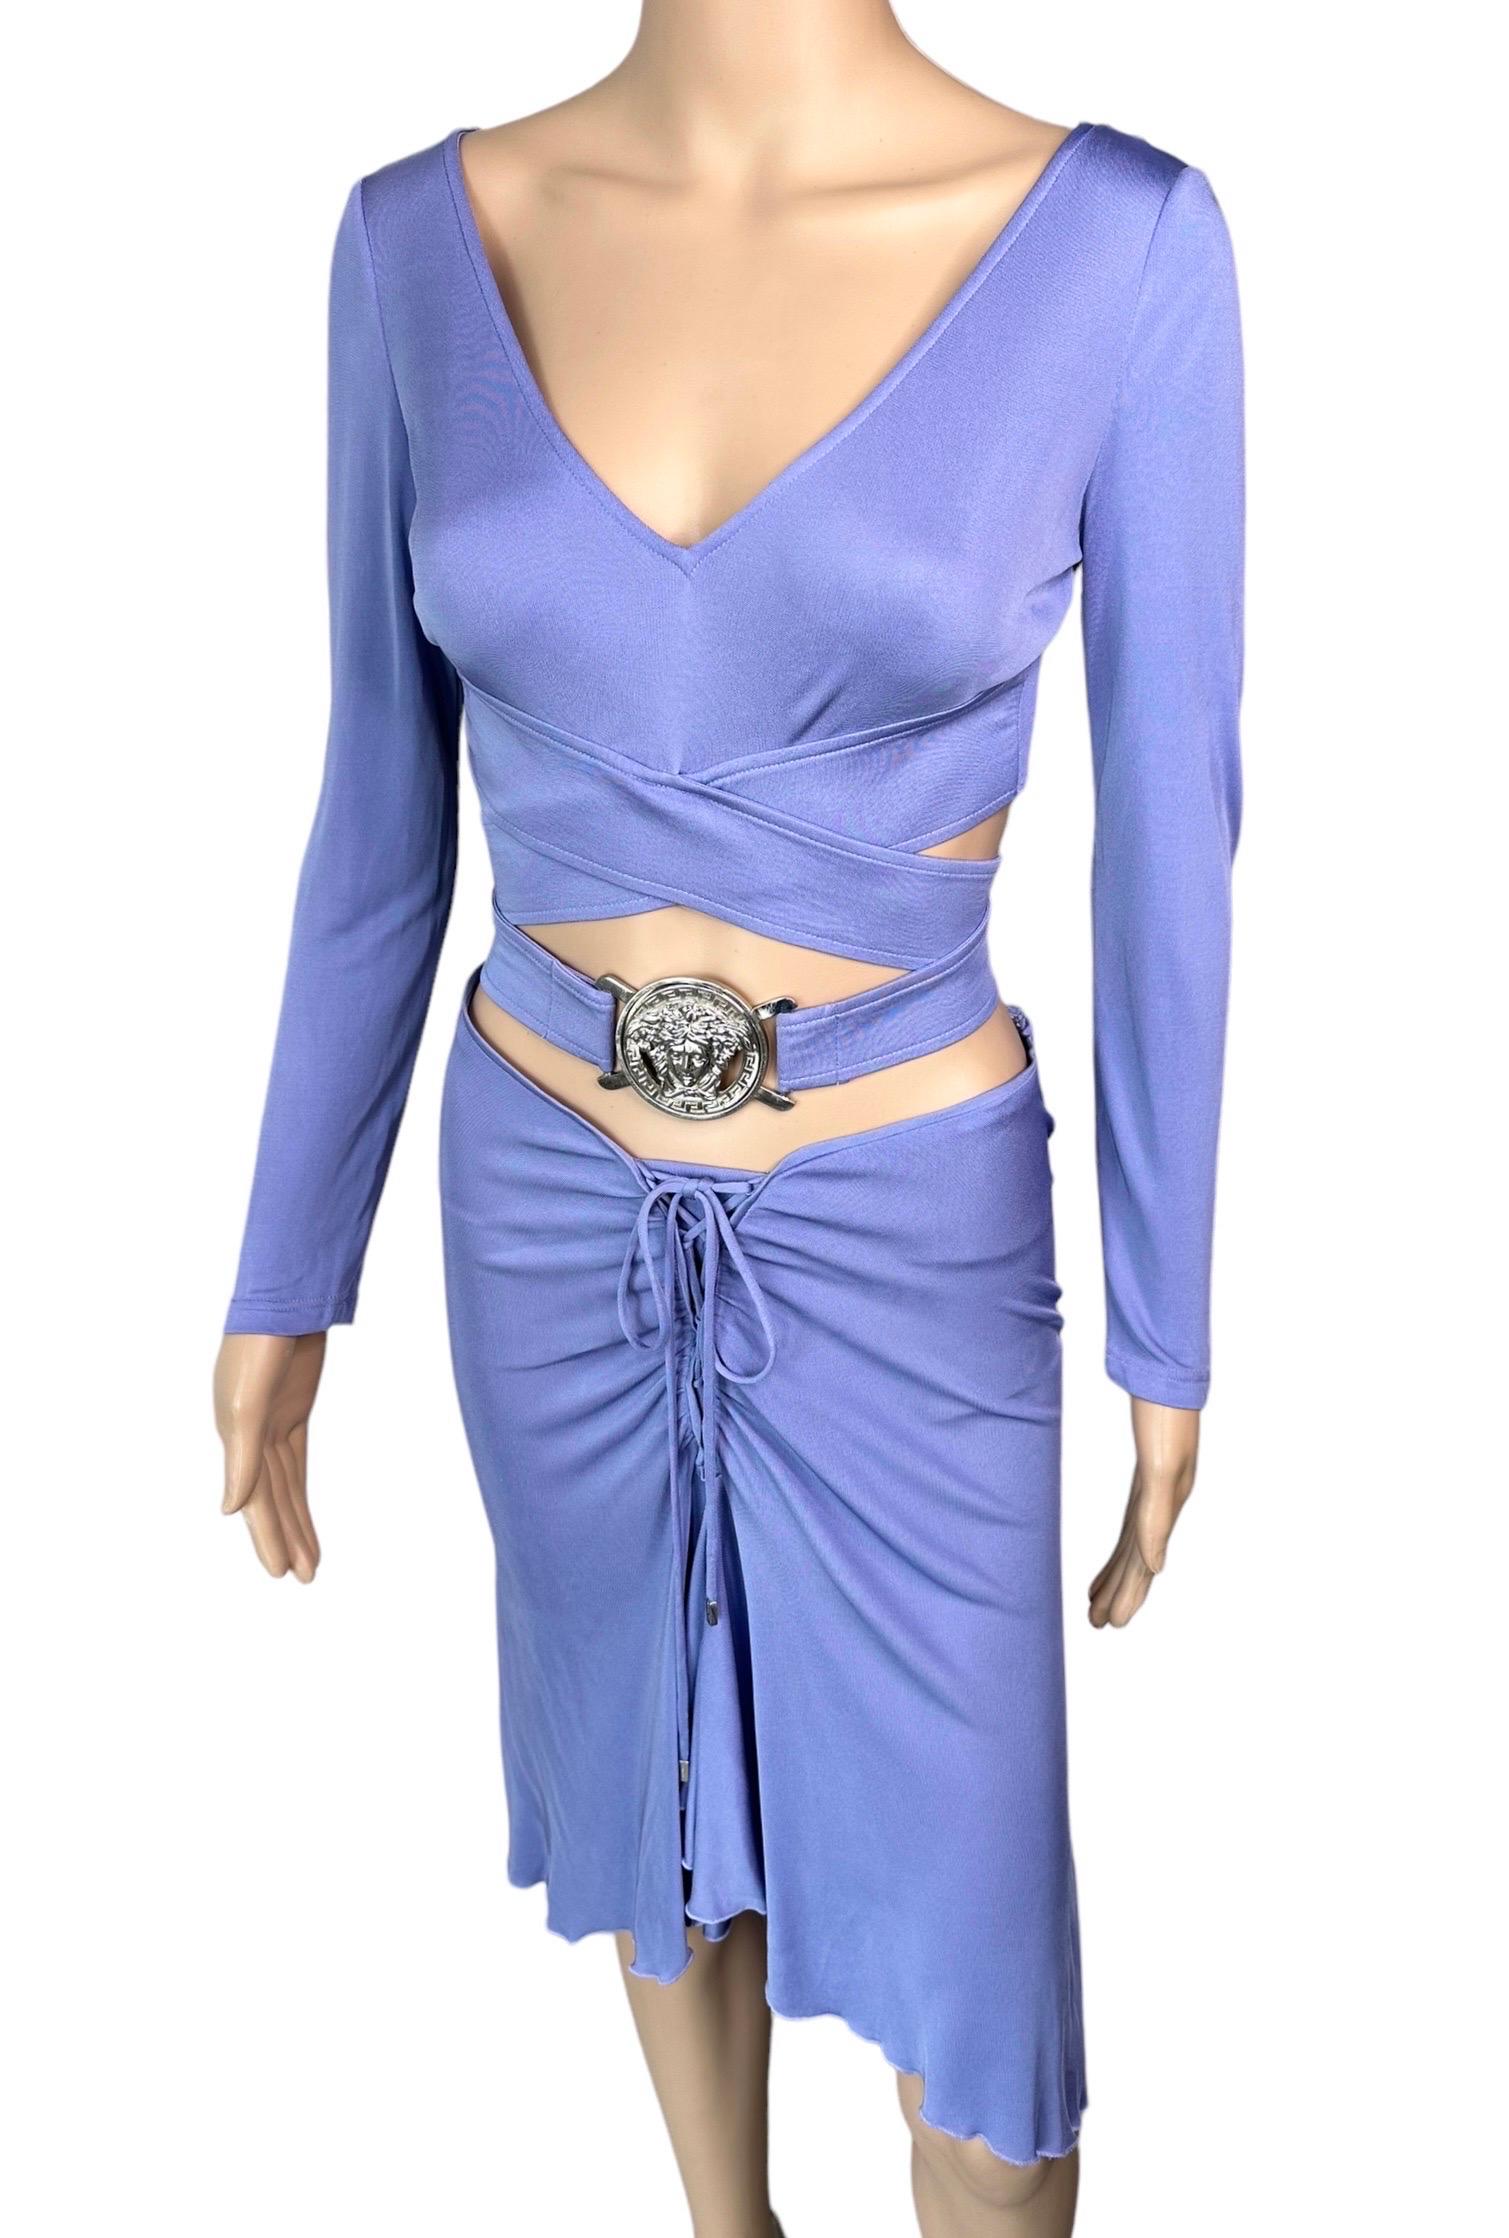 Versace S/S 2005 Logo Embellished Belted Wrap Crop Top & Skirt 2 Piece Set In Good Condition For Sale In Naples, FL